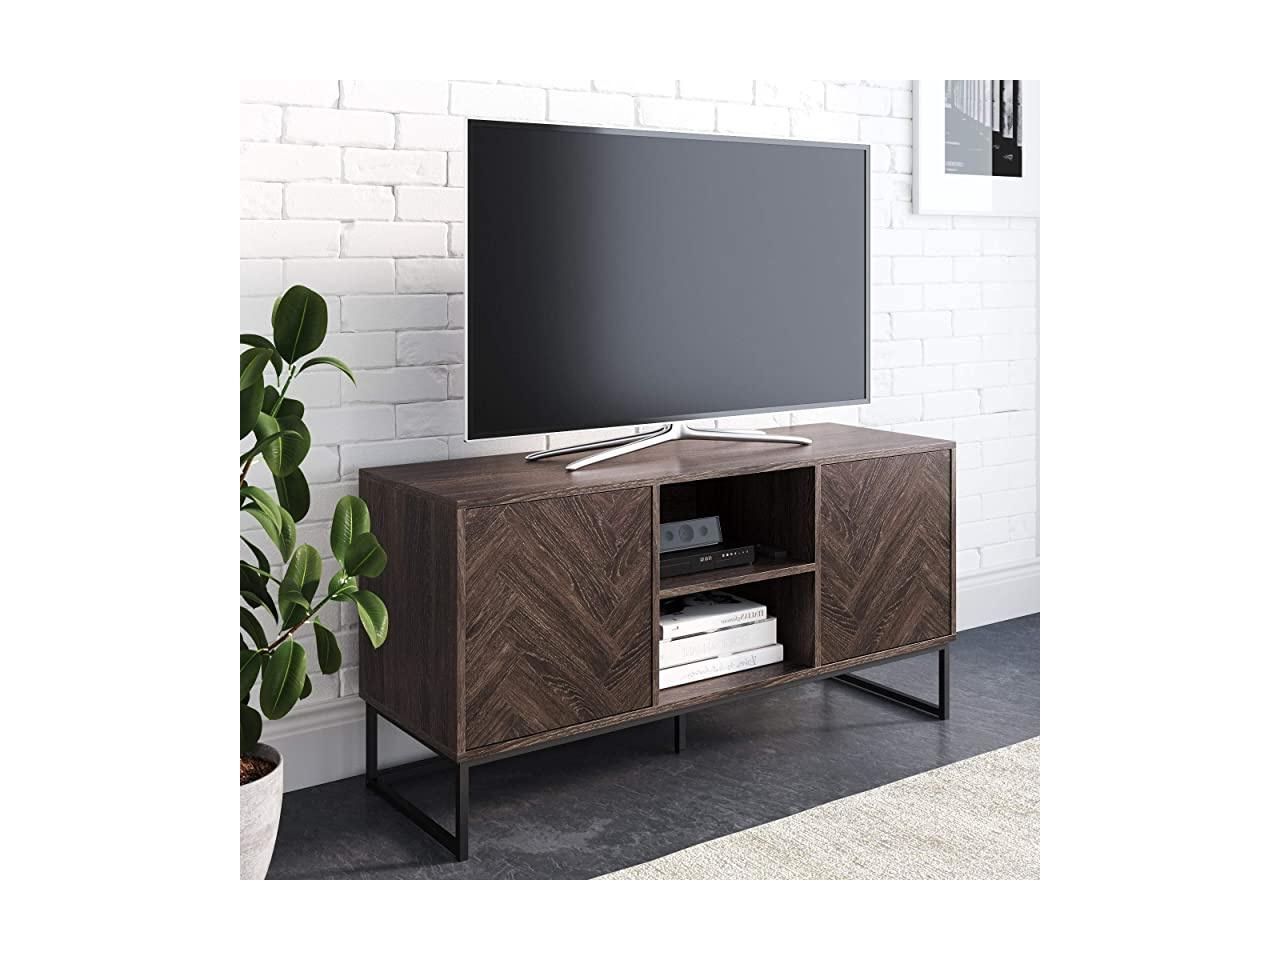 Dylan Media Console Cabinet Or Tv Stand With Doors For With Media Console Cabinet Tv Stands With Hidden Storage Herringbone Pattern Wood Metal (View 7 of 20)